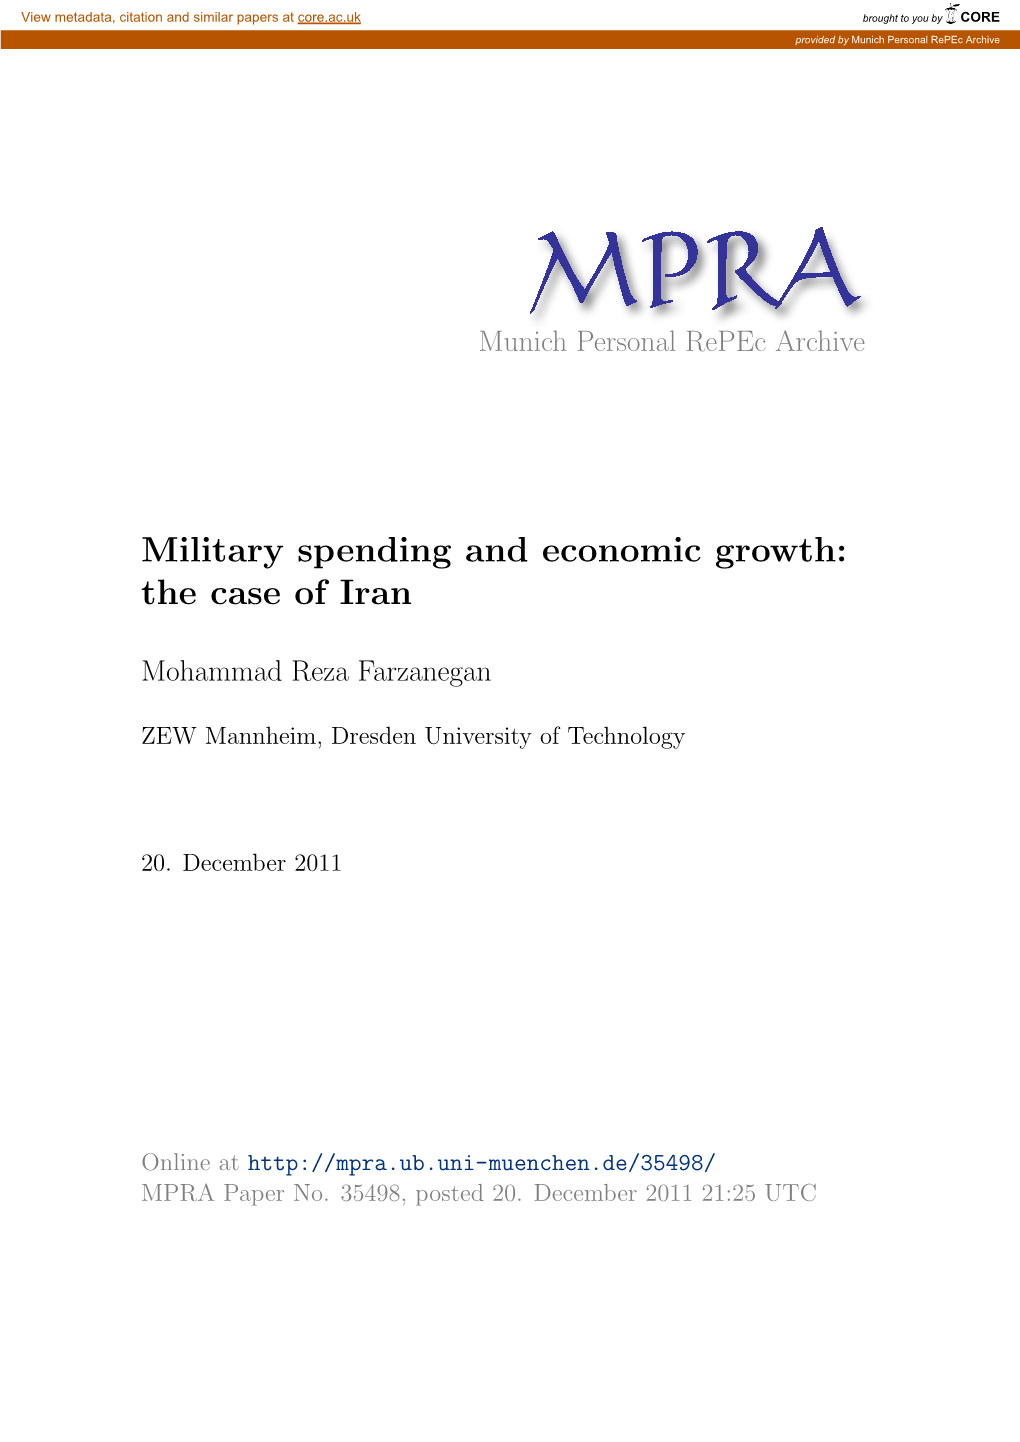 Military Spending and Economic Growth: the Case of Iran